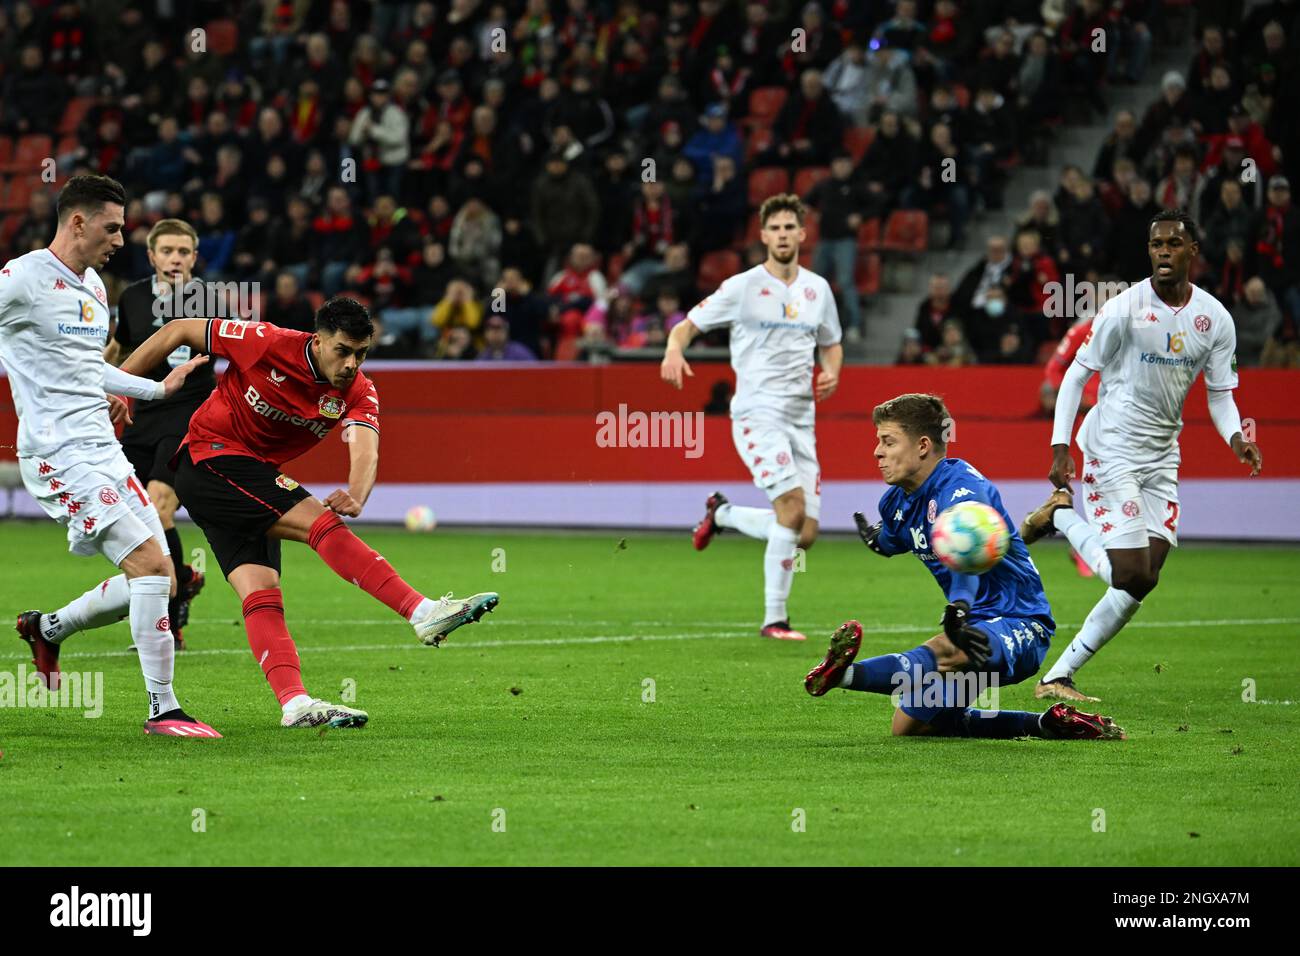 Leverkusen, Germany. 19th Feb, 2023. Soccer: Bundesliga, Bayer Leverkusen - FSV Mainz 05, Matchday 21, at BayArena: Leverkusen's Nadiem Amiri (2nd from left) scores the 1:1. Goalkeeper Finn Dahmen of Mainz can't keep the ball out. Credit: Federico Gambarini/dpa - IMPORTANT NOTE: In accordance with the requirements of the DFL Deutsche Fußball Liga and the DFB Deutscher Fußball-Bund, it is prohibited to use or have used photographs taken in the stadium and/or of the match in the form of sequence pictures and/or video-like photo series./dpa/Alamy Live News Stock Photo